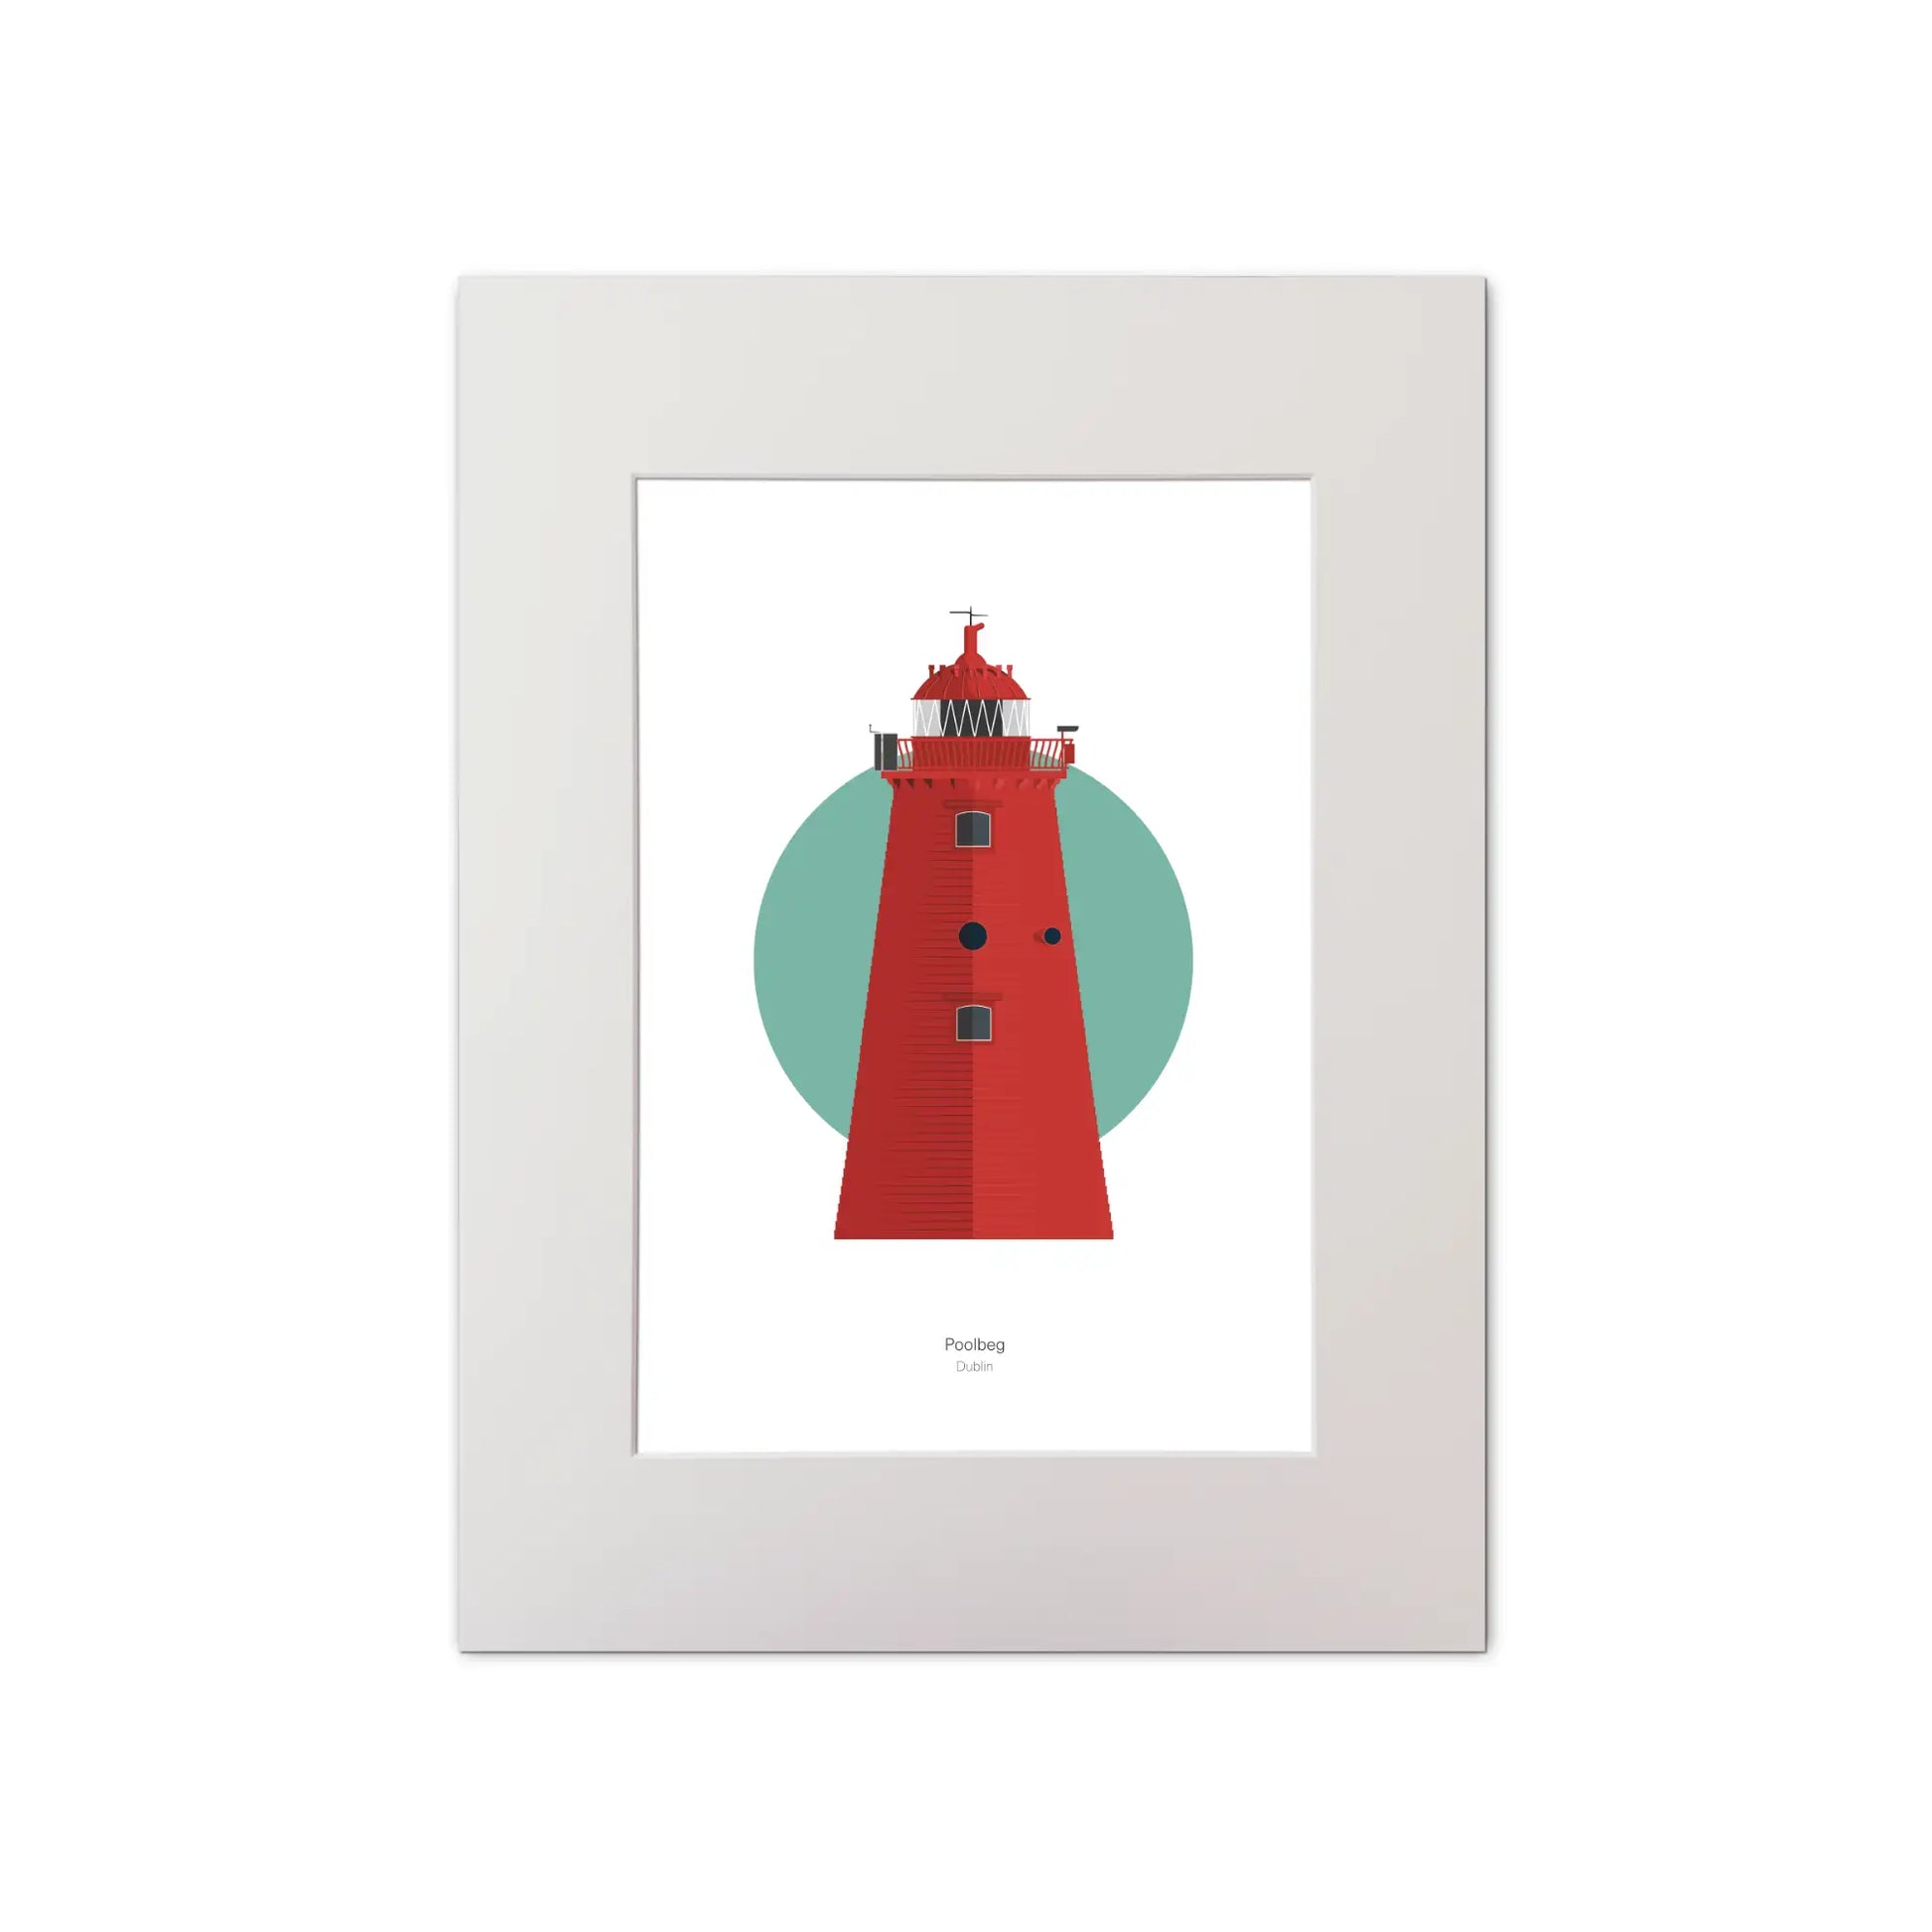 Illustration of Poolbeg lighthouse on a white background inside light blue square, mounted and measuring 30x40cm.